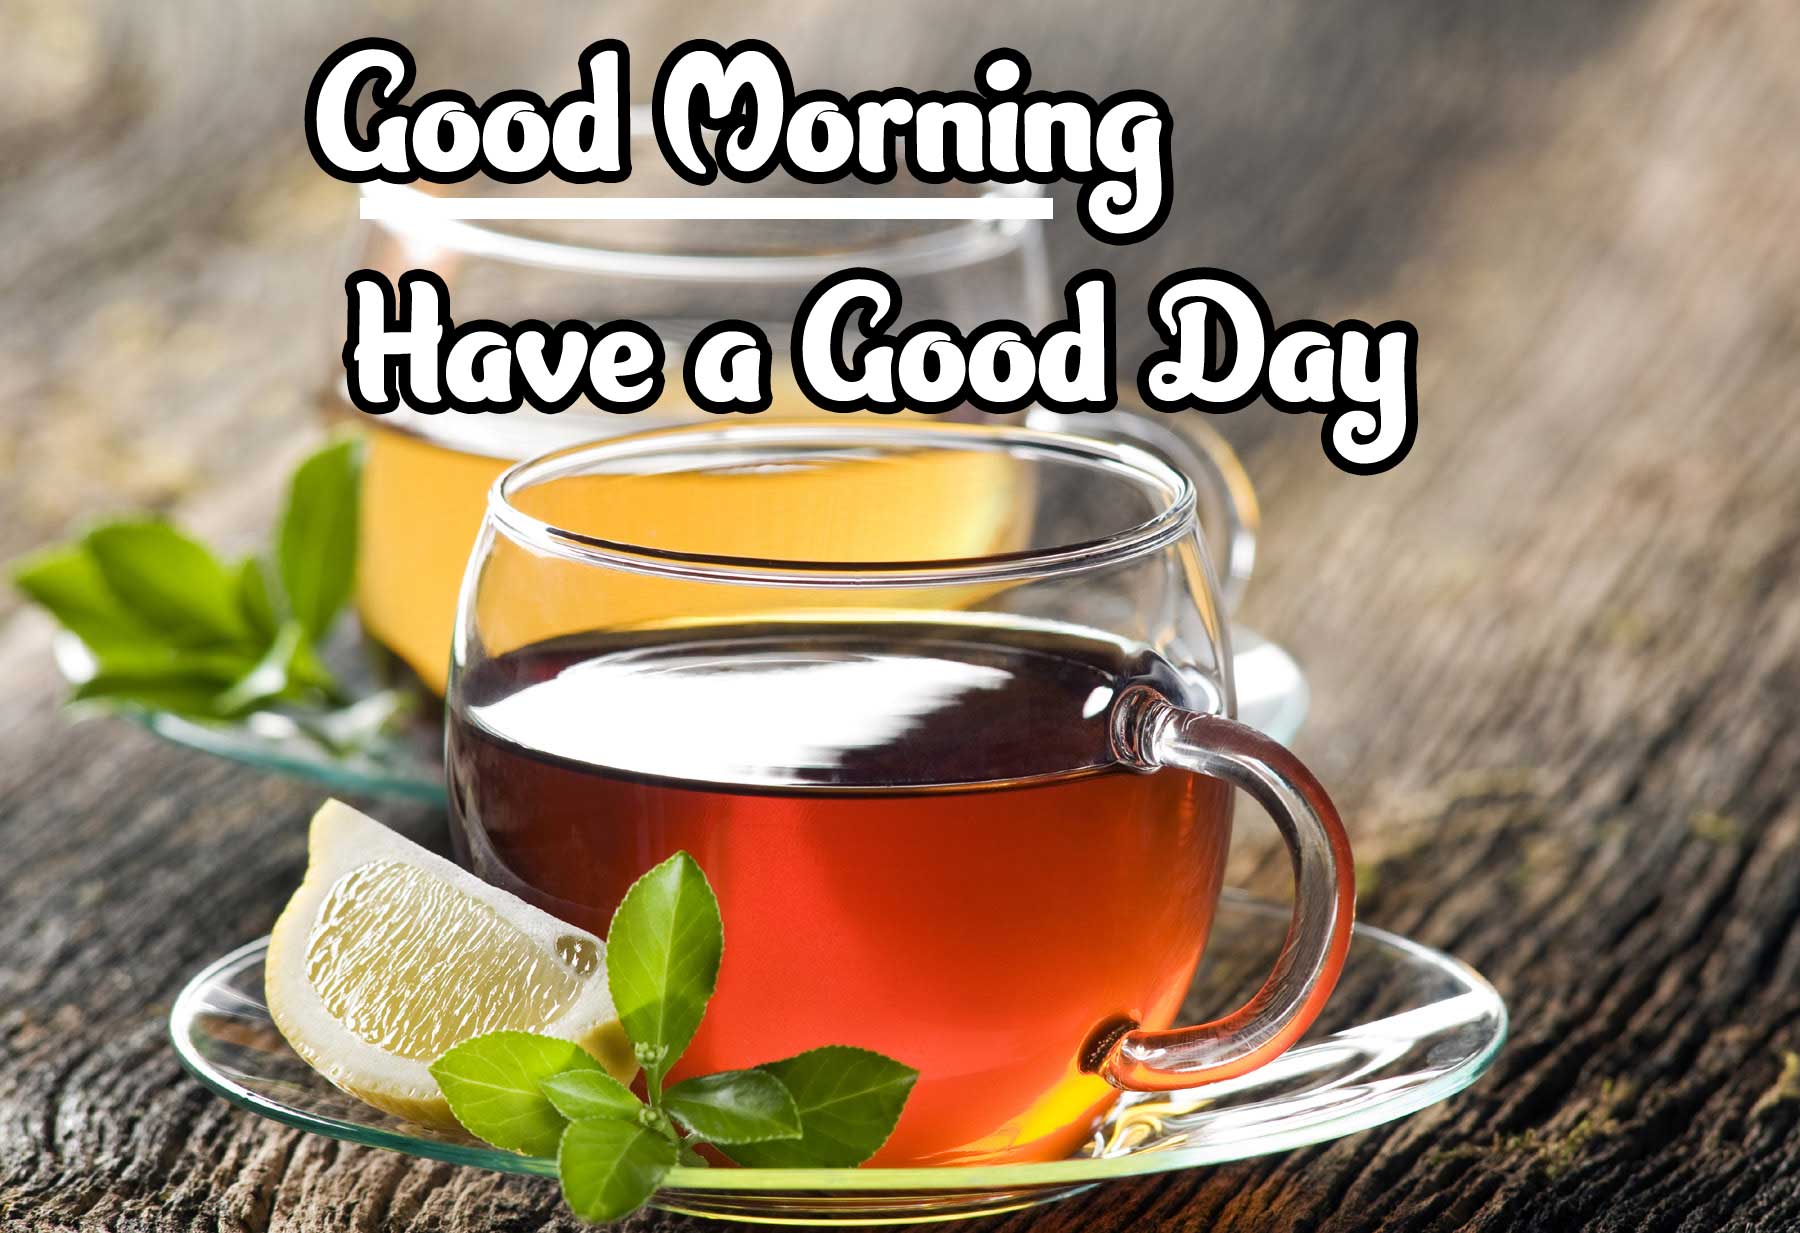 Good Morning Wishes Images 4K 1080p Wallpaper Download 